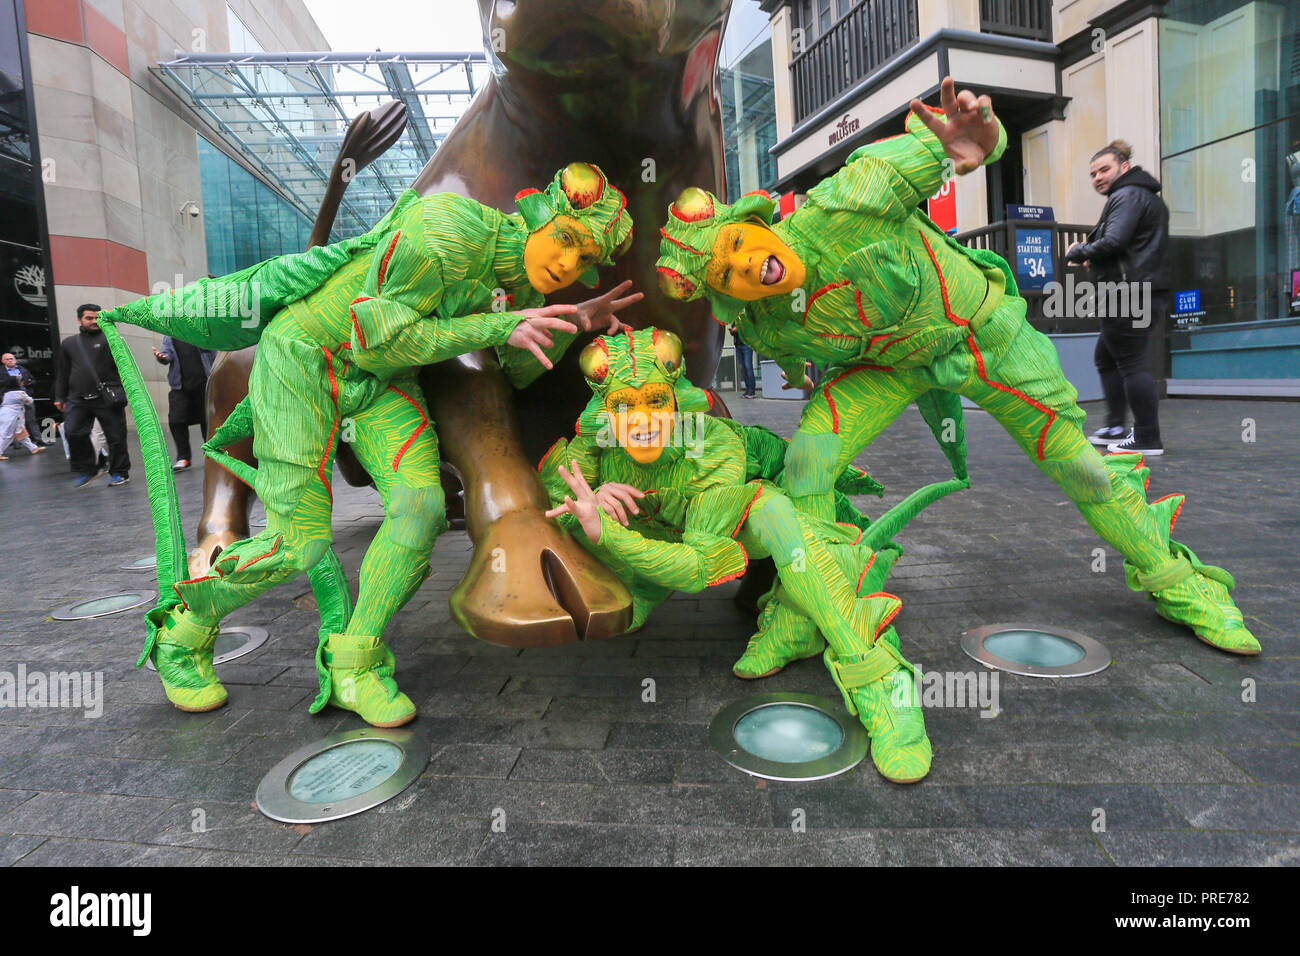 Birmingham, UK. 2nd October, 2018. Three of the cast of crickets in Cirque de Soleil's OVO show arrive in Birmingham Bull Ring ahead of their premiere performance on Wednesday 3rd October in The Arena, Birmingham. The production of one of the world's most creative and skilful circuses runs from 3rd - 7th October 2018. Peter Lopeman/Alamy Live News Stock Photo